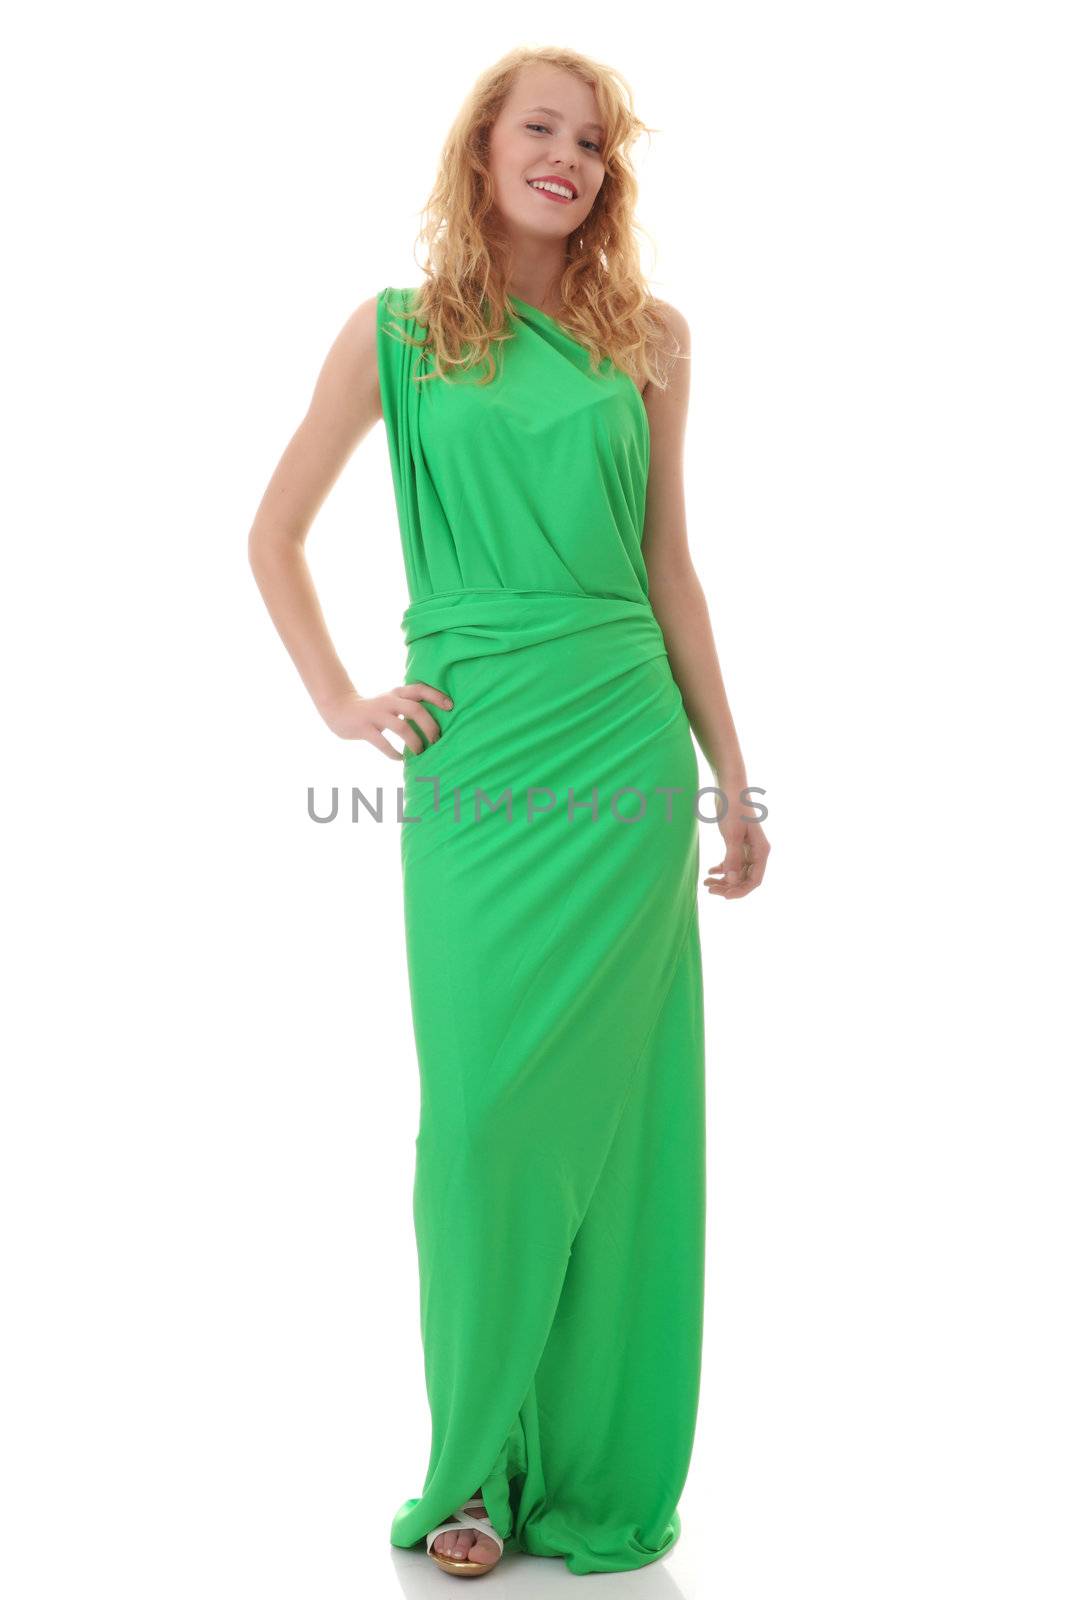 Young beautiful girl in green dress by BDS